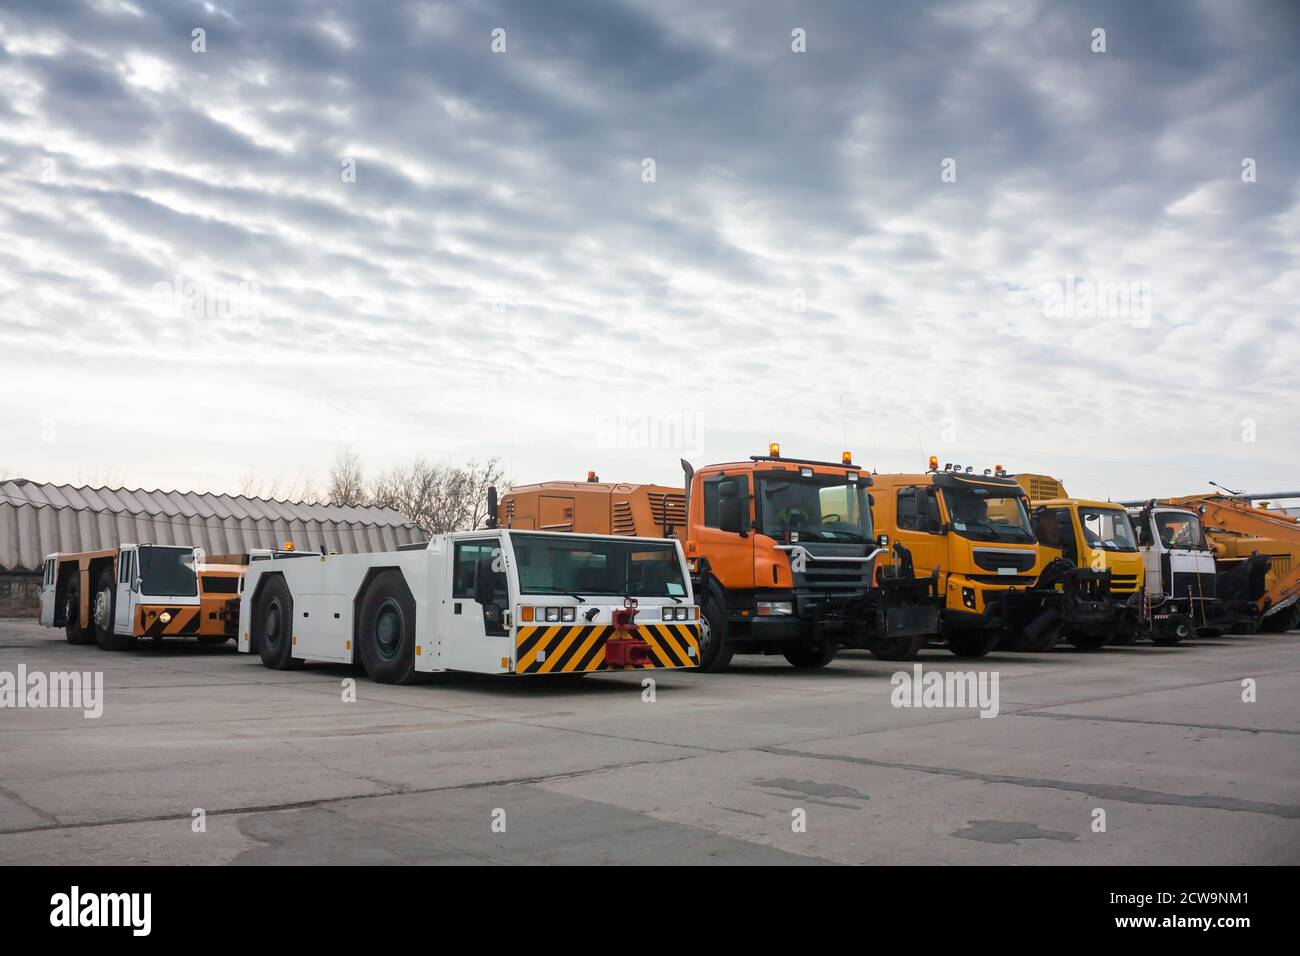 Tow tractors and cleaning trucks in the airport Stock Photo